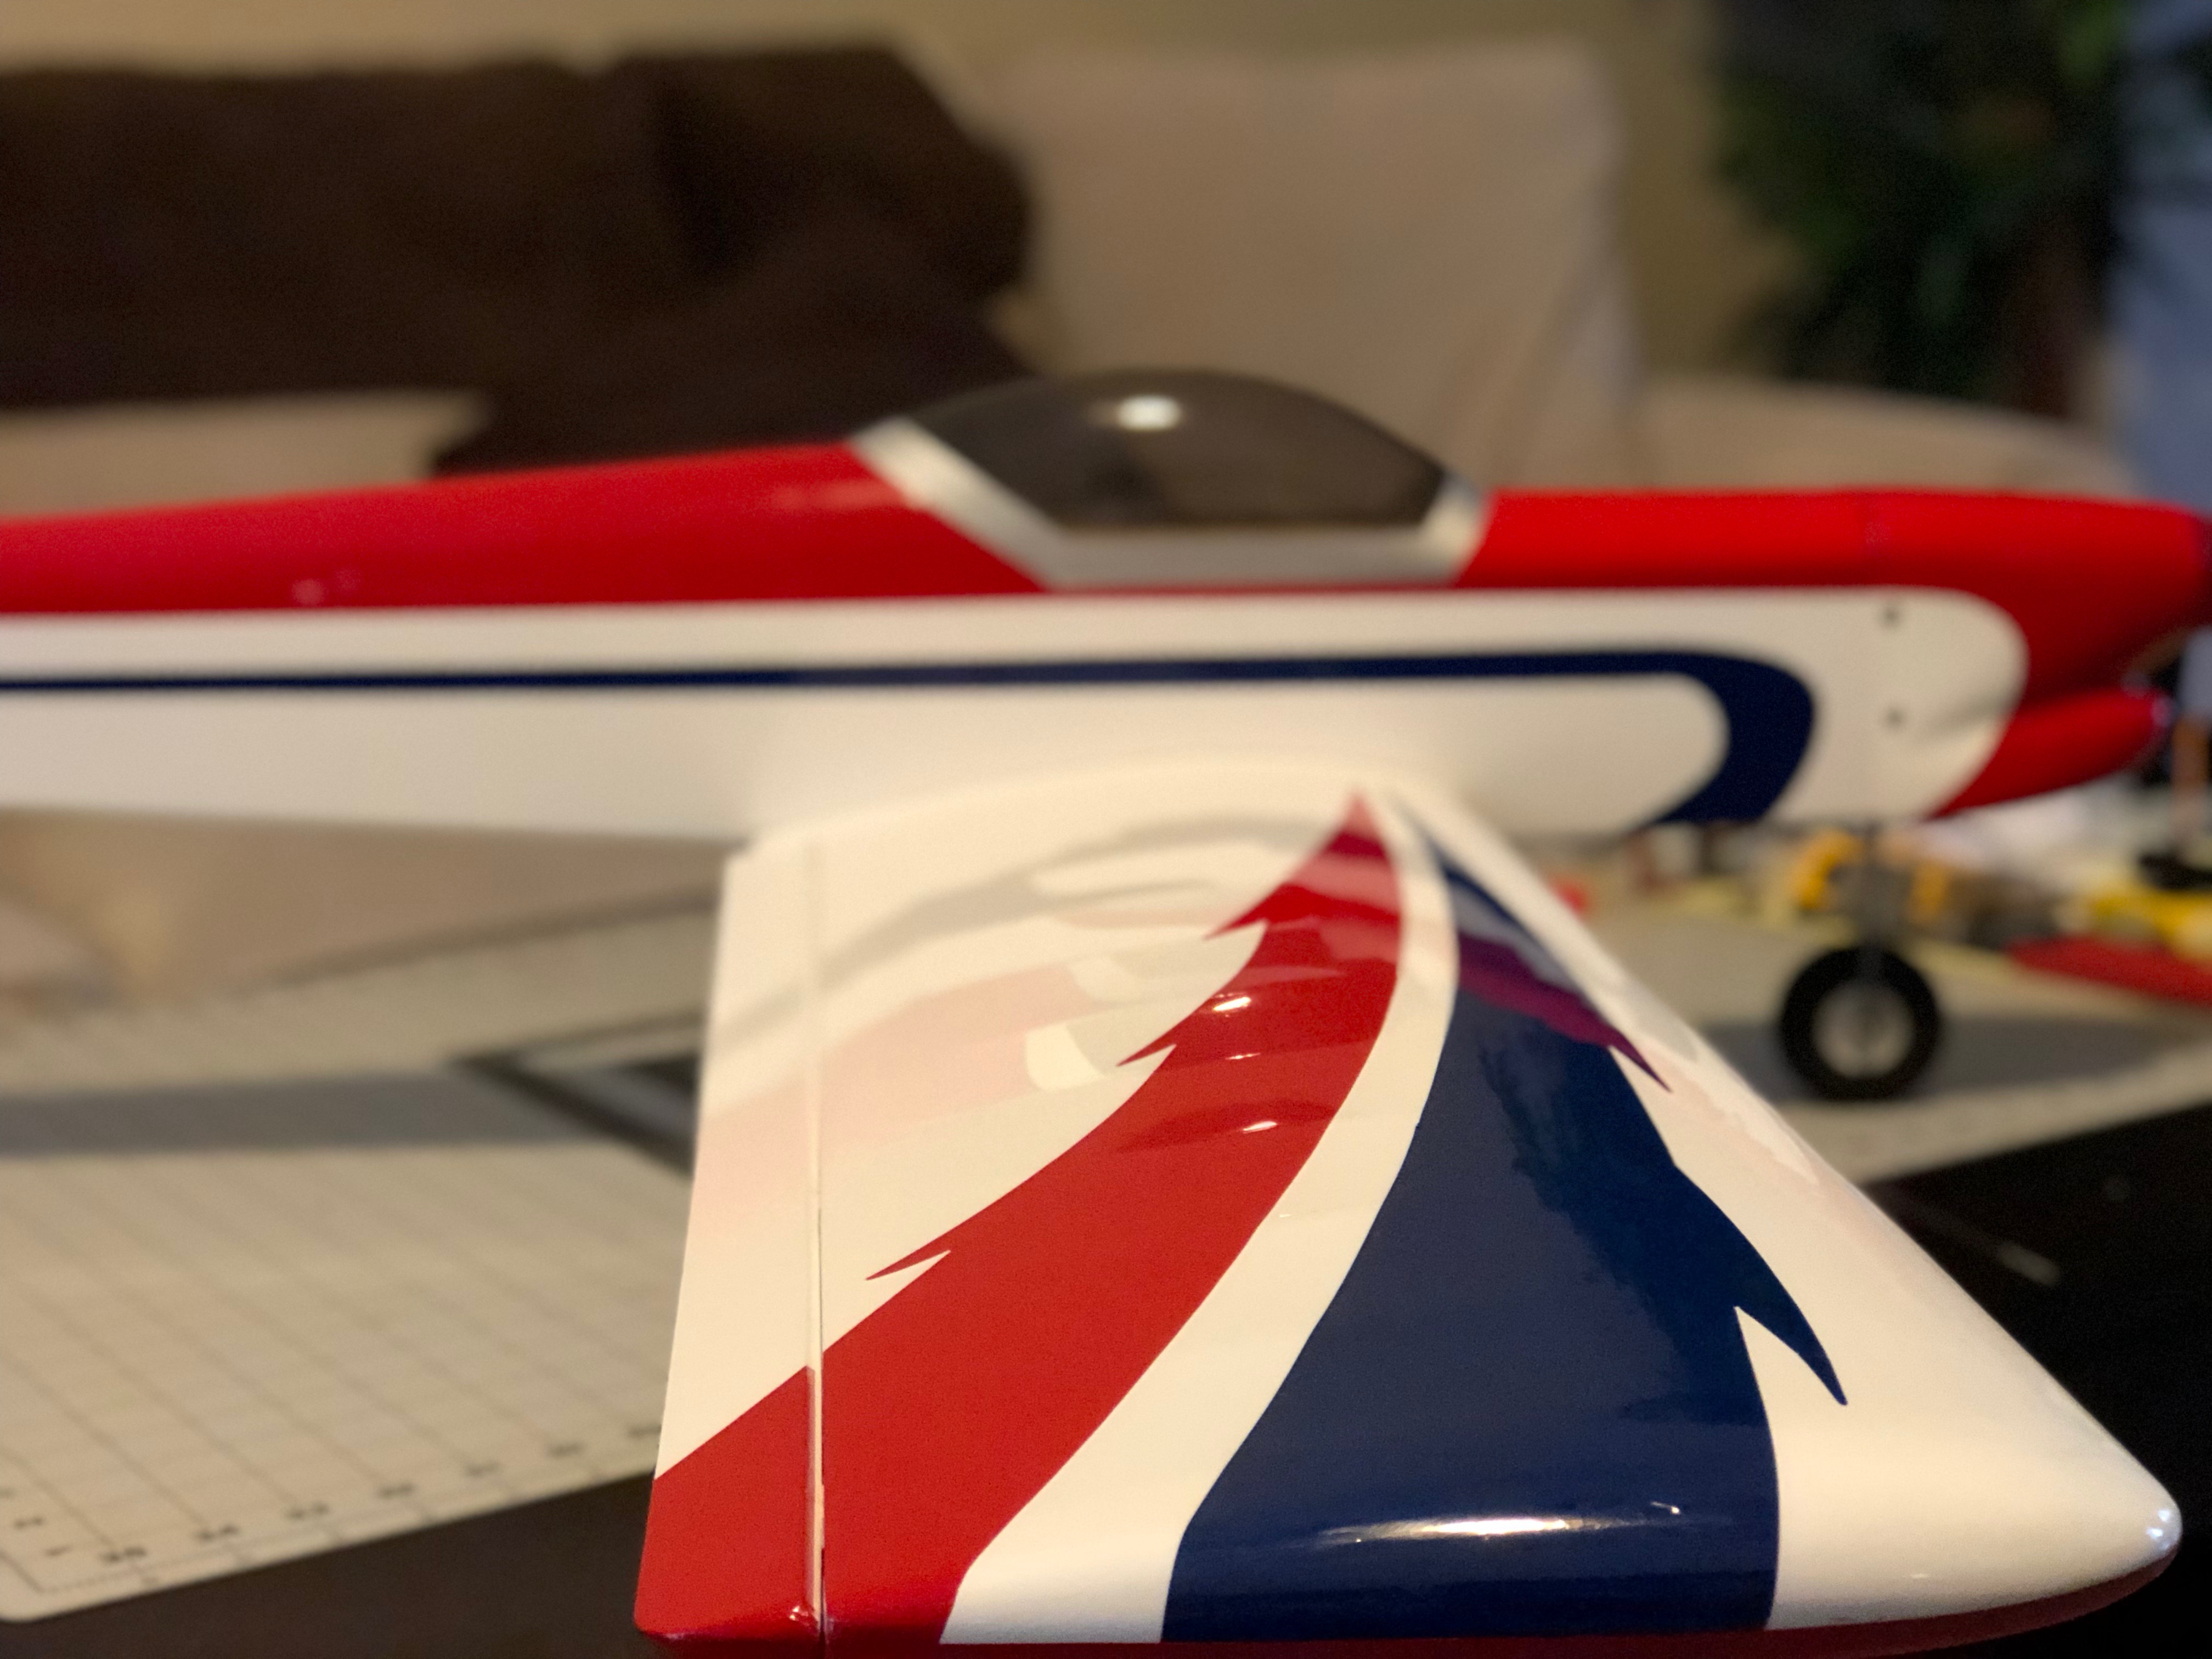 tower hobby airplanes